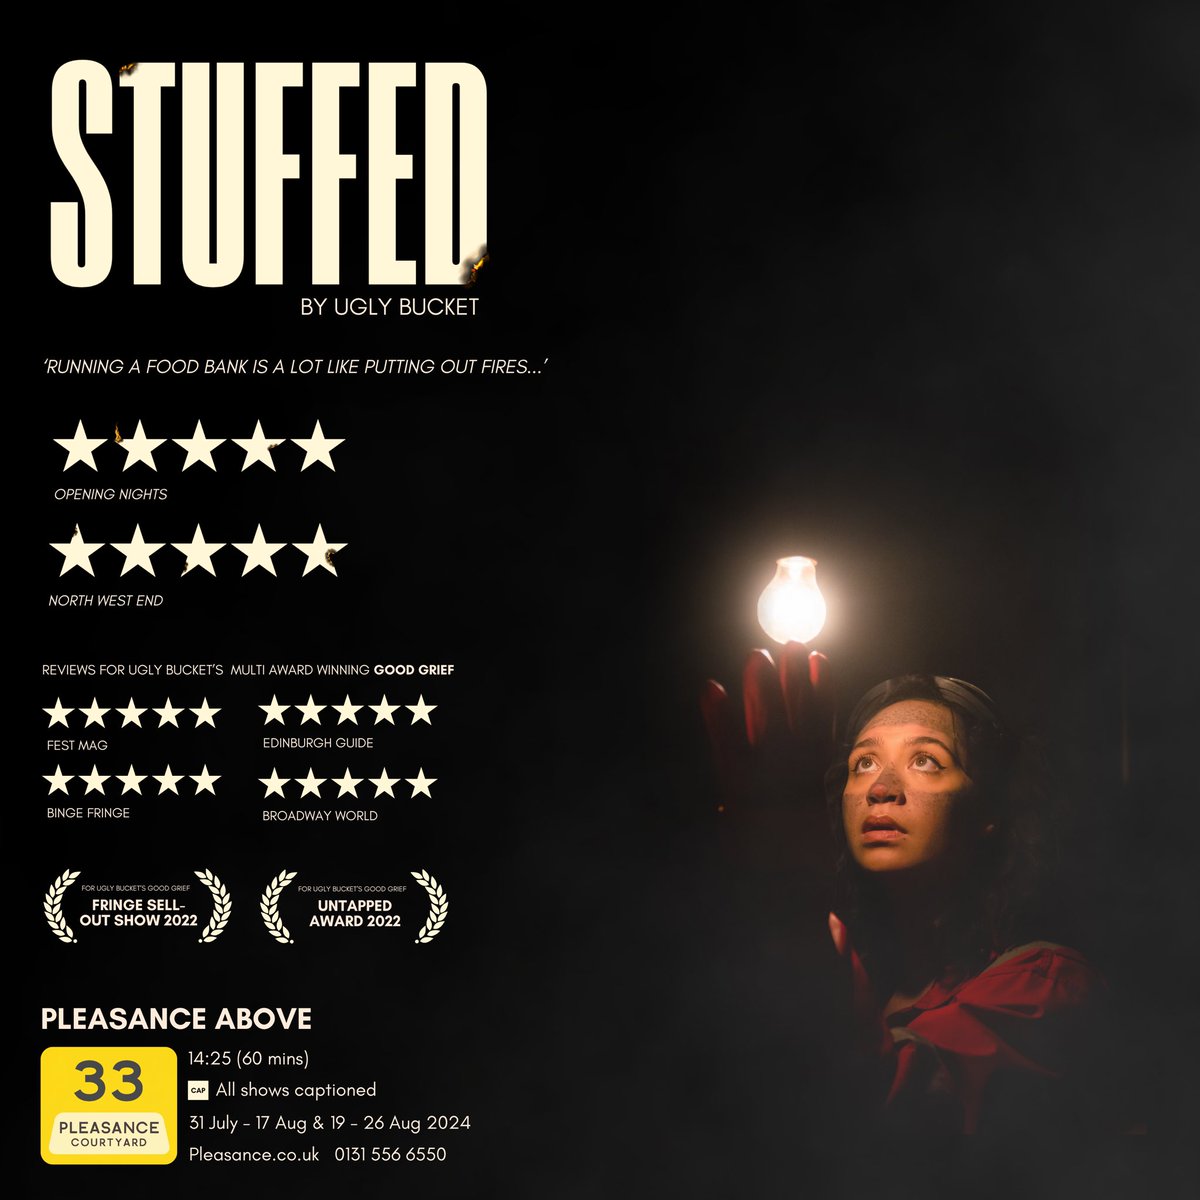 Edinburgh. Brace yourselves 🔥 This is a show about food banks. This is not a show about food. STUFFED is a roaring call to arms amidst the wreckage of a desecrated system. @ThePleasance @edfringe Tickets on sale now 🎟️ pleasance.co.uk/event/stuffed There’s no going back 🧯